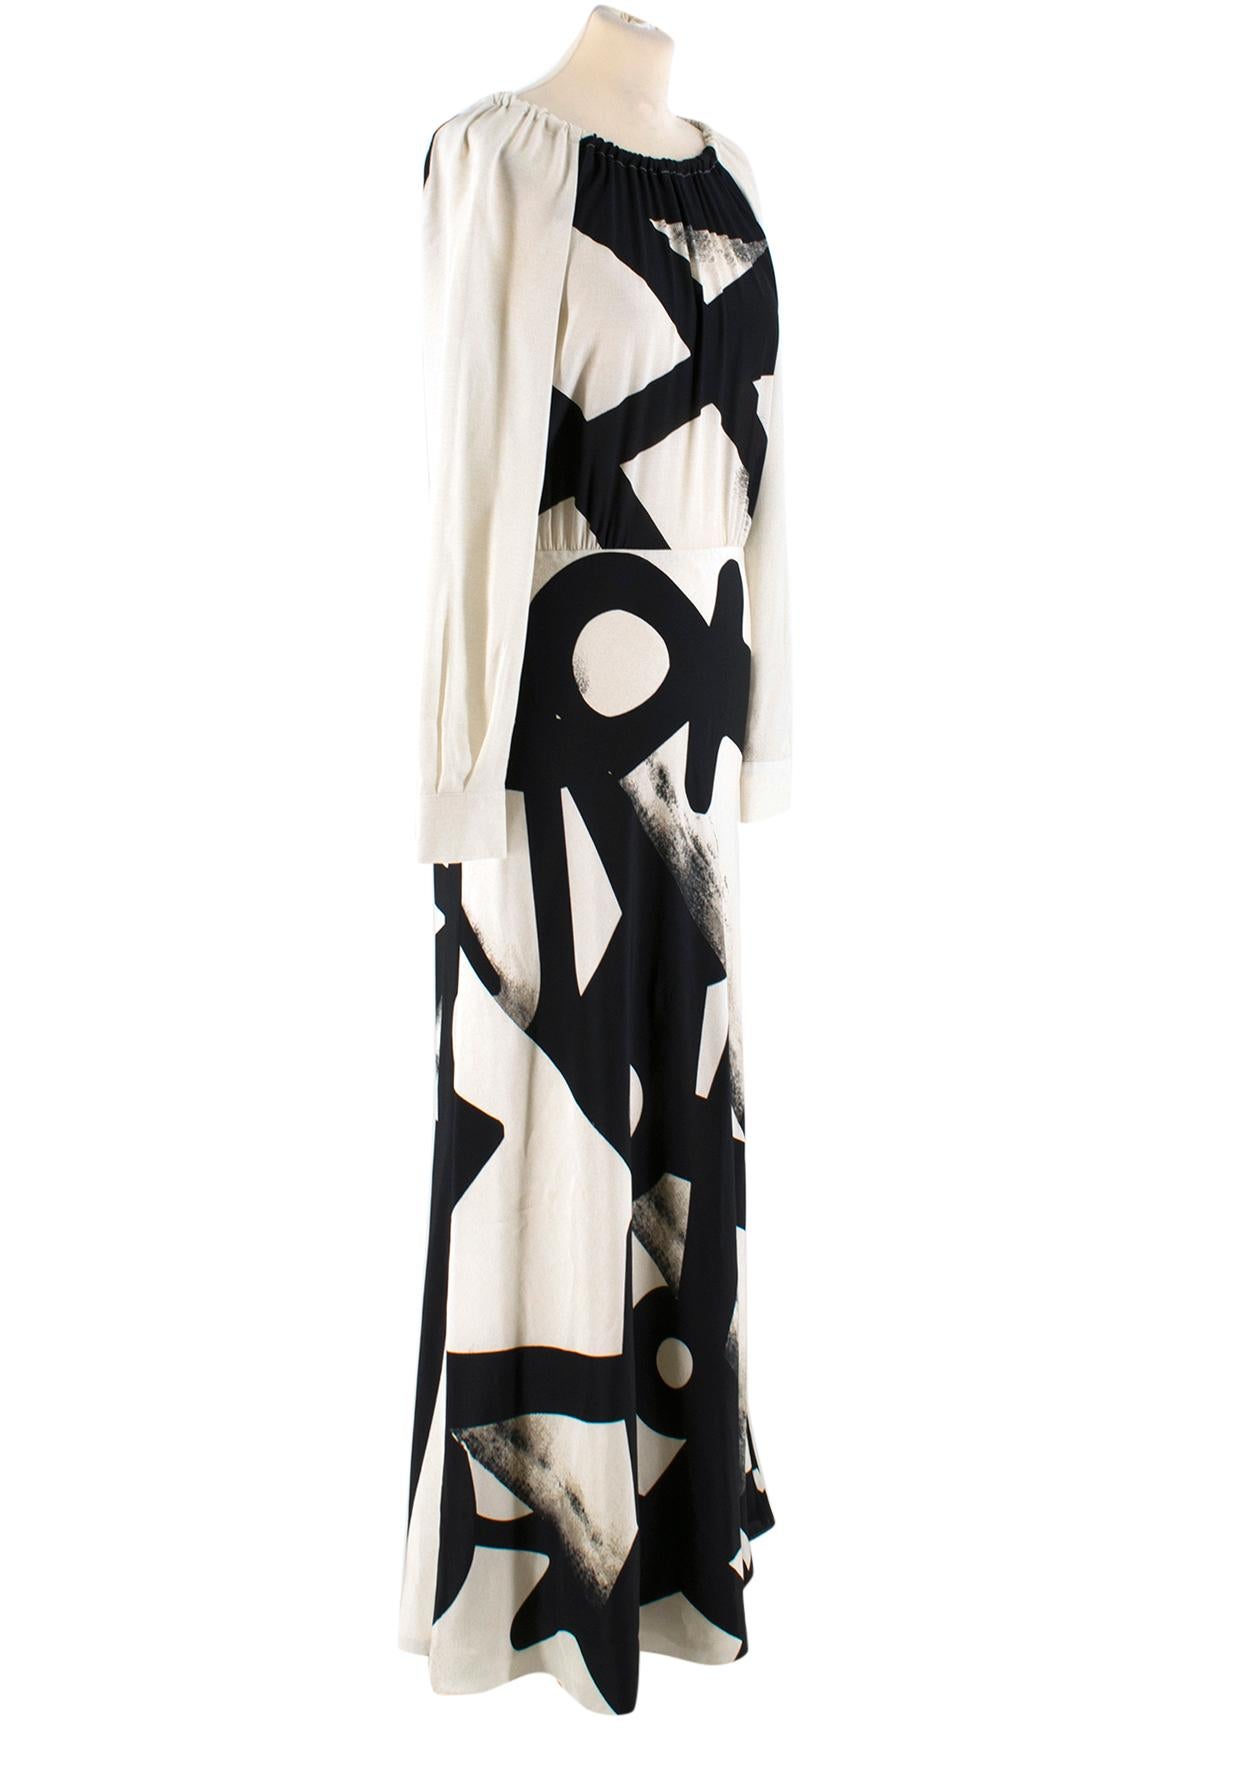 MaxMara Cream Long sleeve Maxi Dress

-Cream and black geometric patterned, lightweight silk
-Cream acetate, silk and polyamid lined 
-High neck 
-Gathering at neckline and shoulders
-Back of neck braided rope tie fastening 
-Low back centre zipper